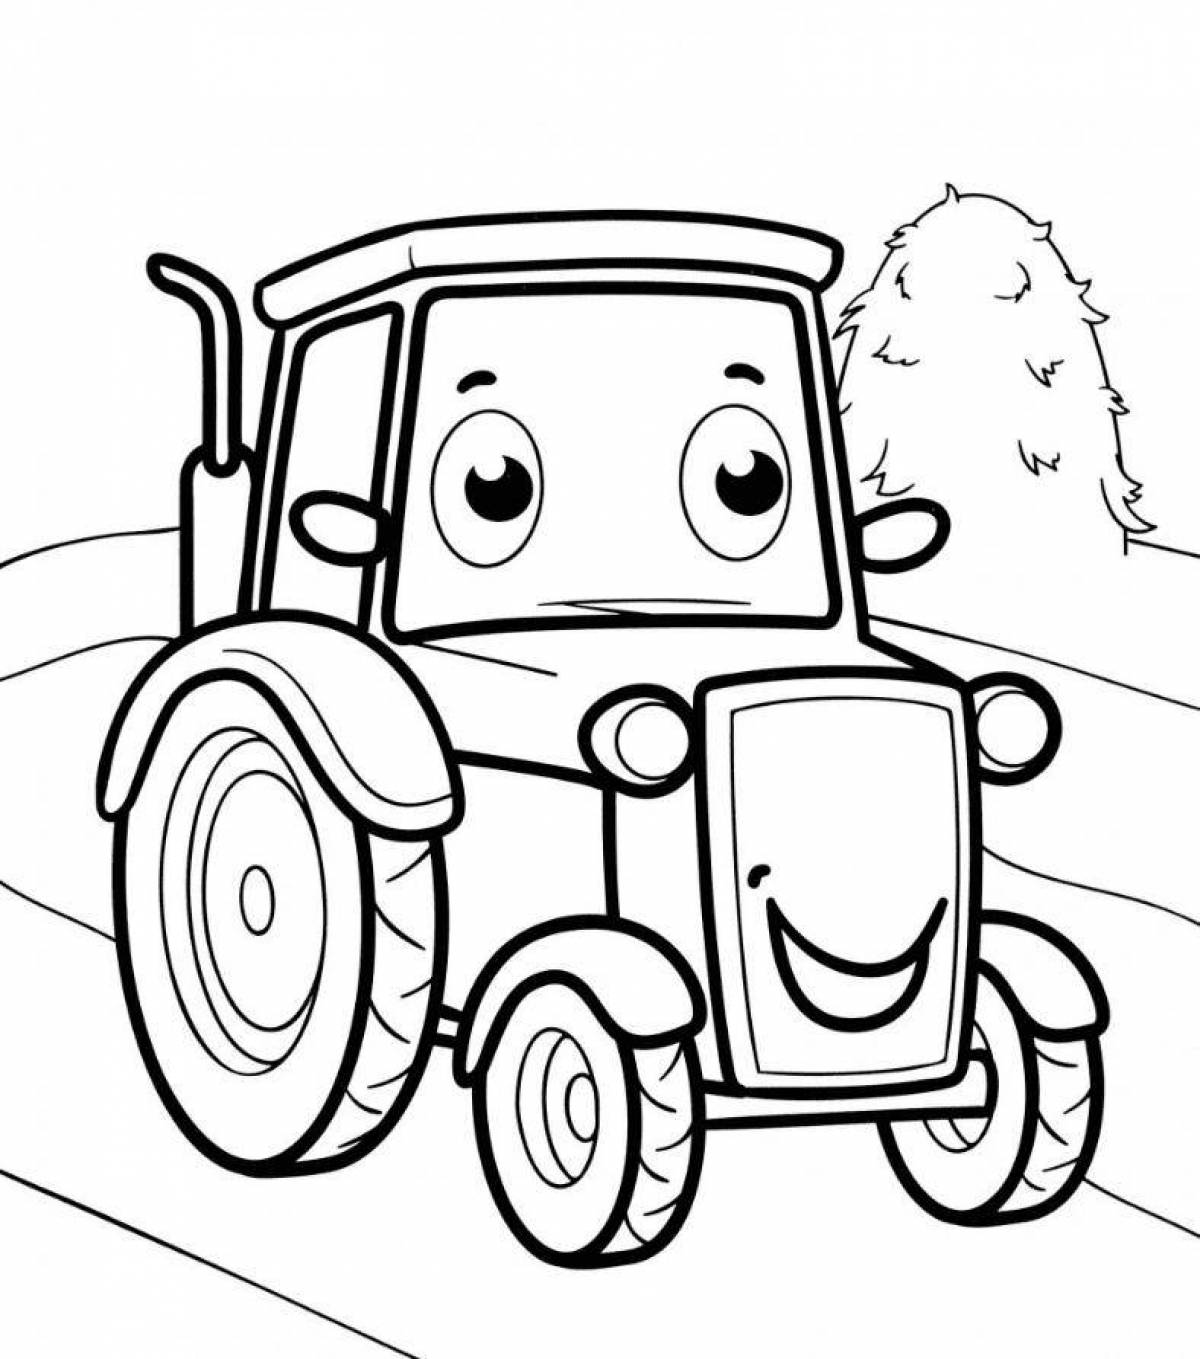 Amazing tractor coloring book for 3-4 year olds